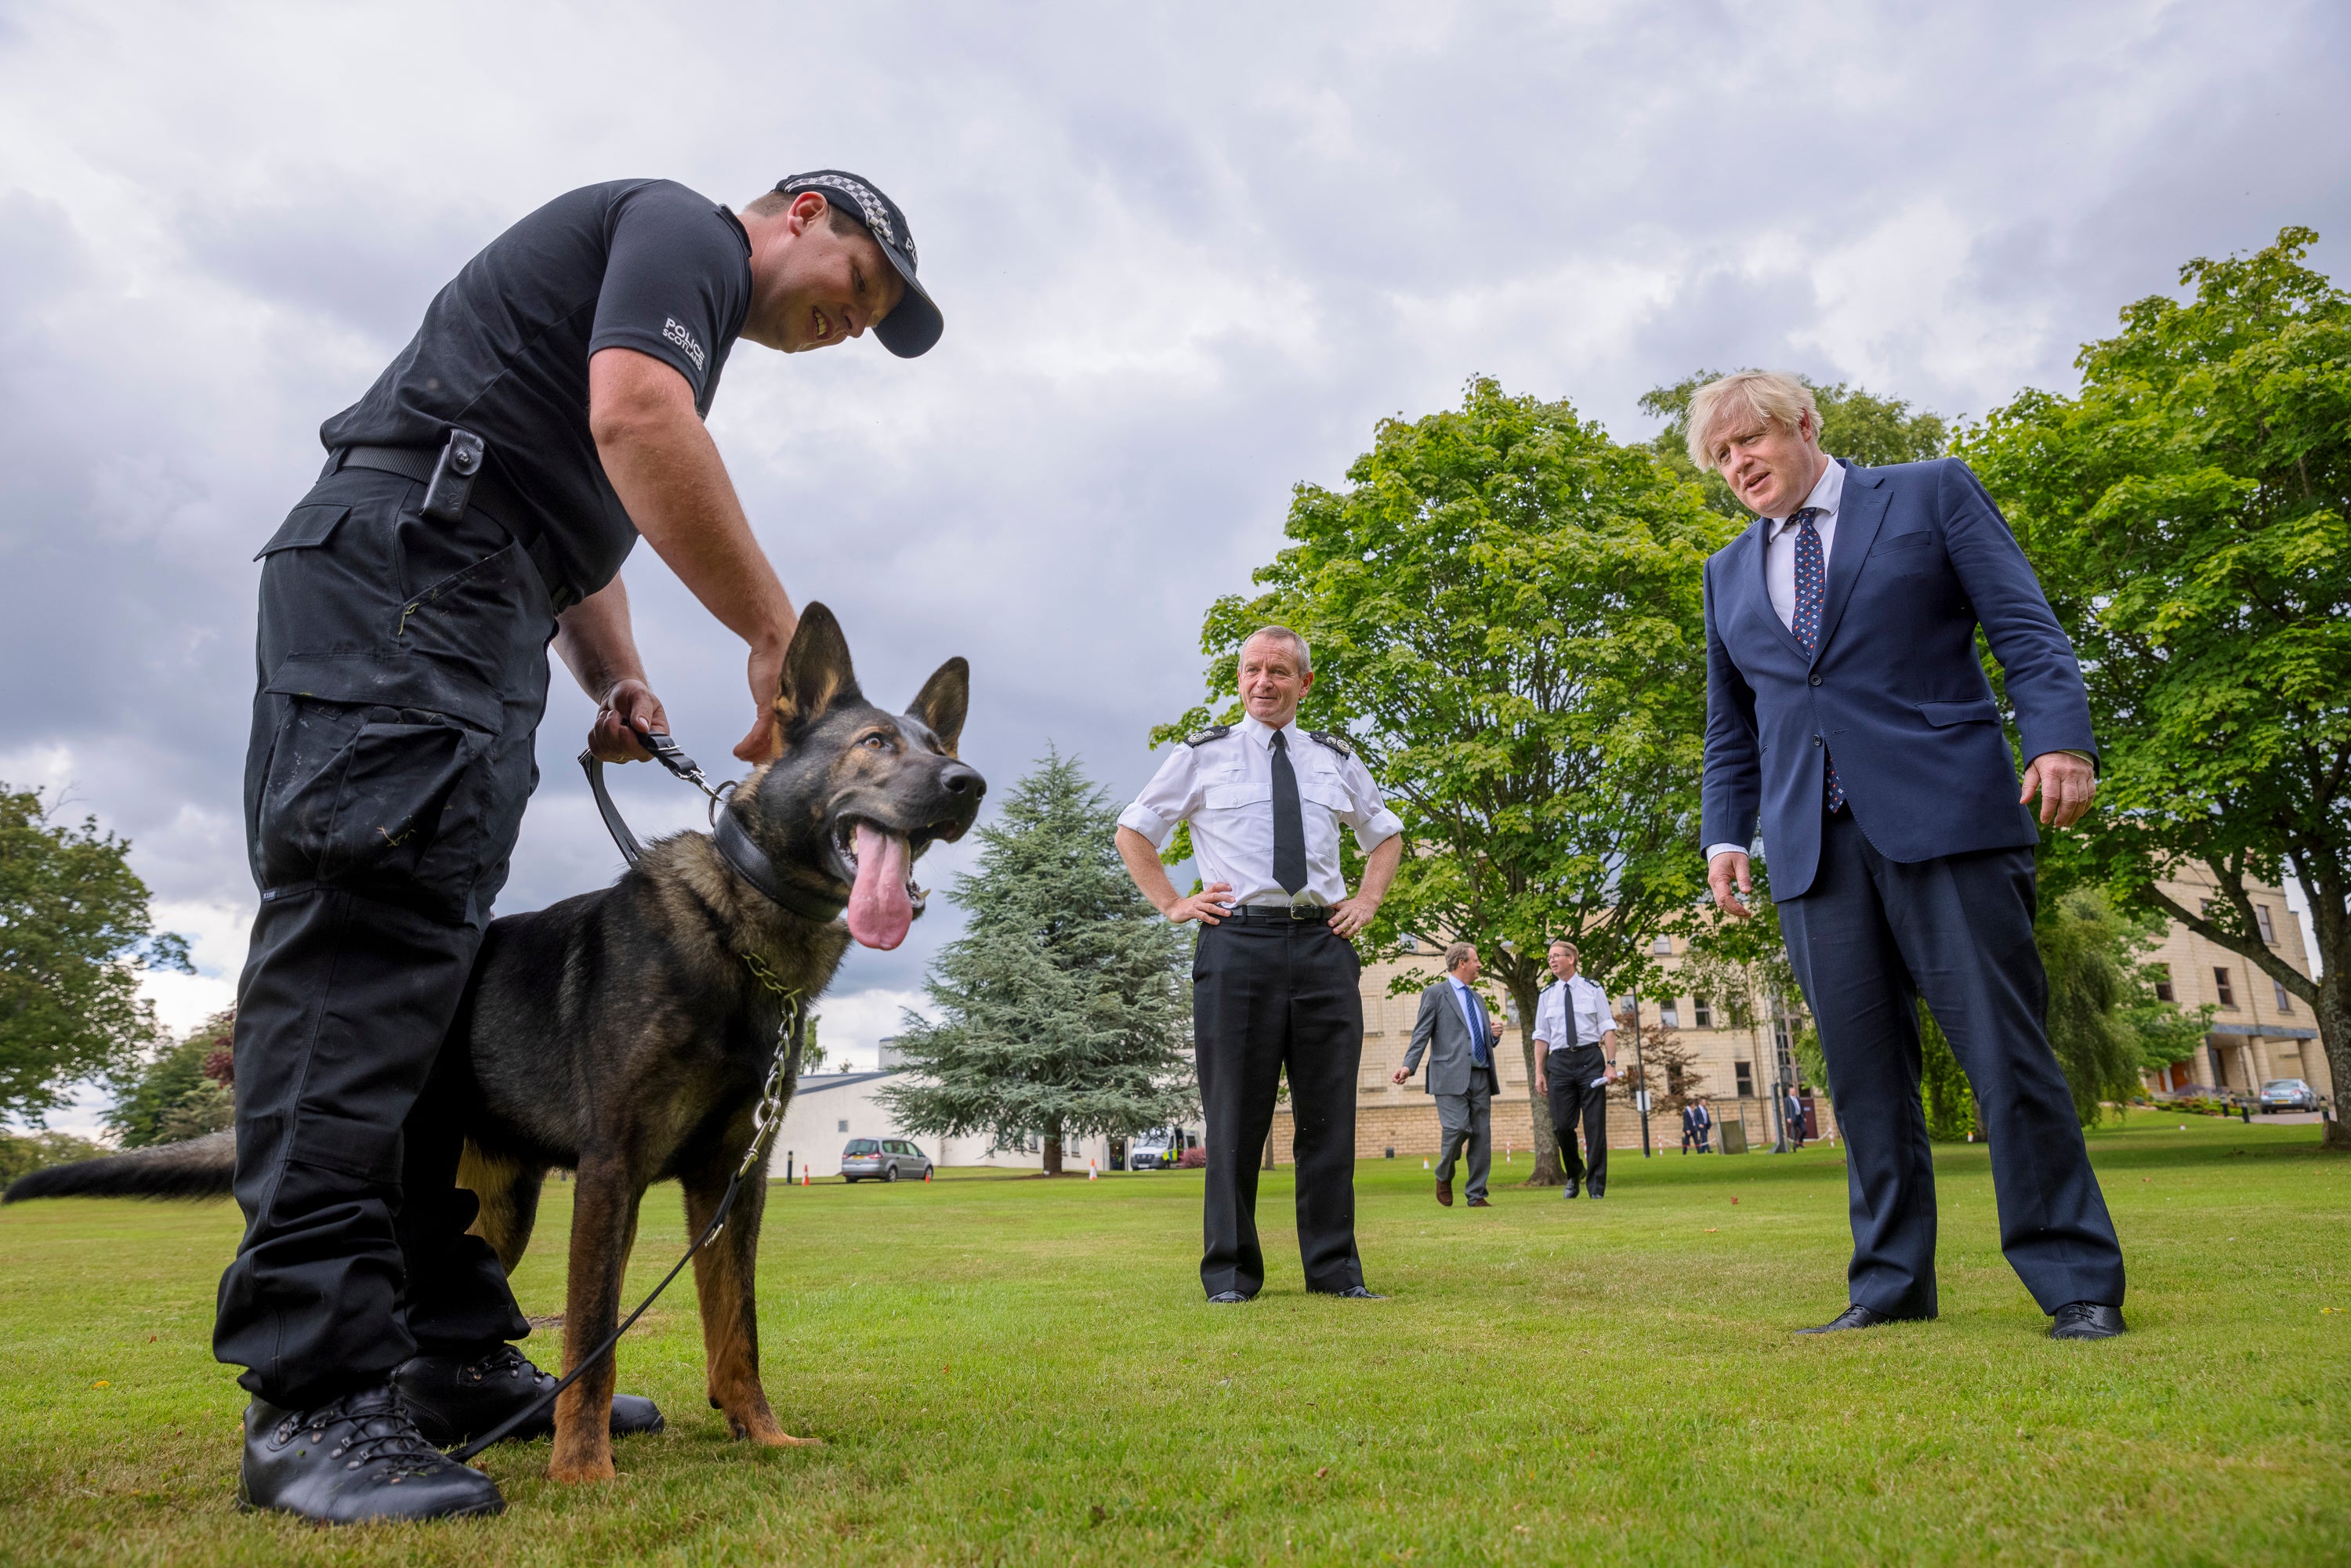 The prime minister, being photographed with police officers (and dog)